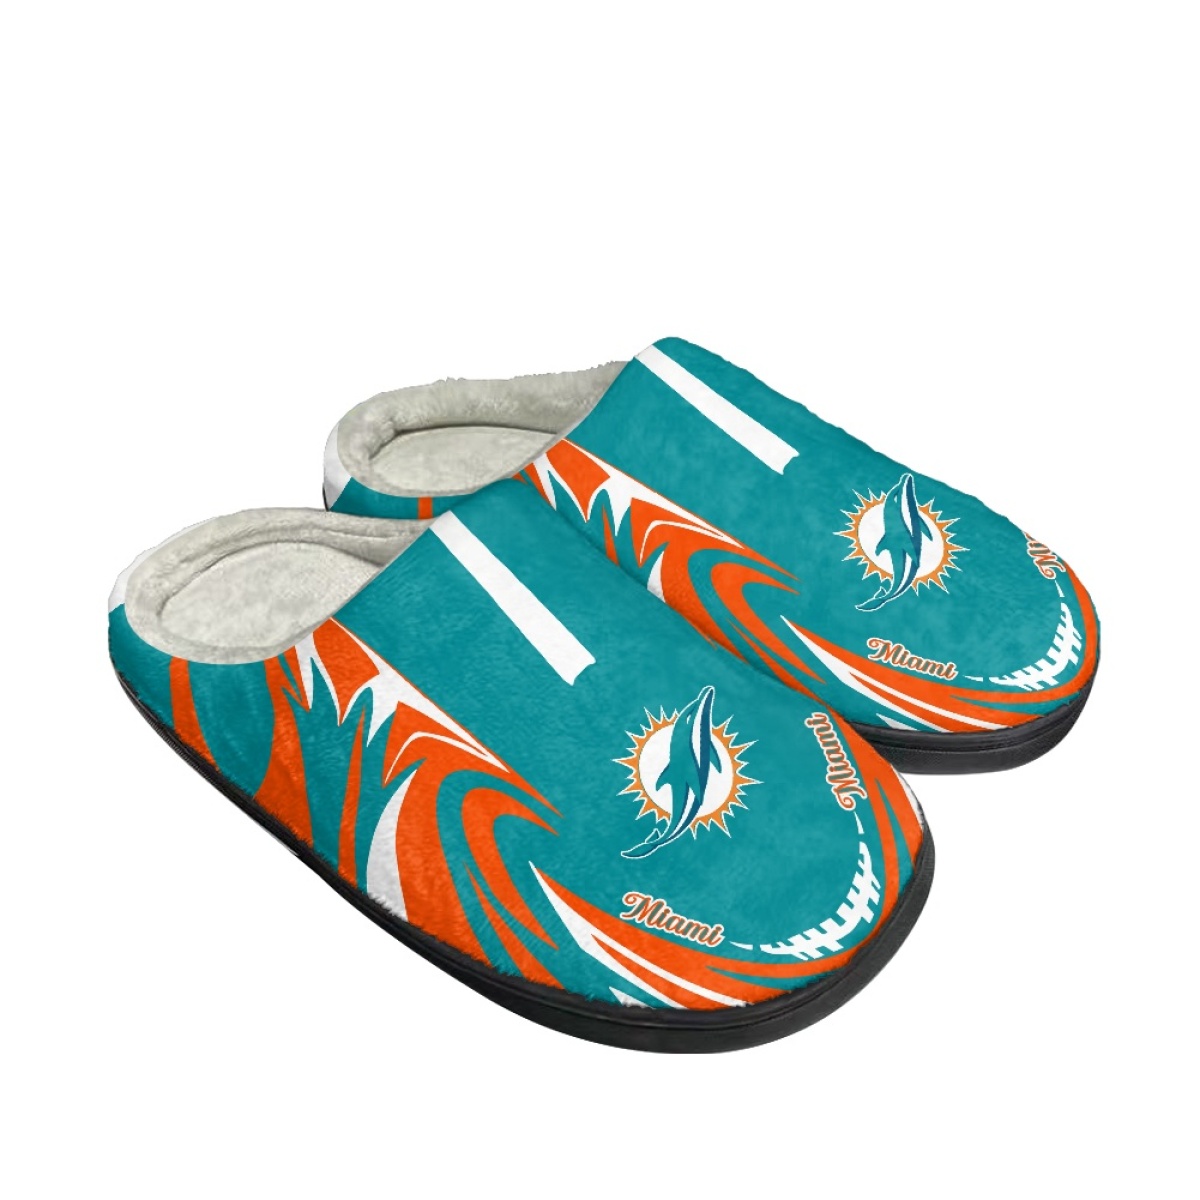 Women's Miami Dolphins Slippers/Shoes 004